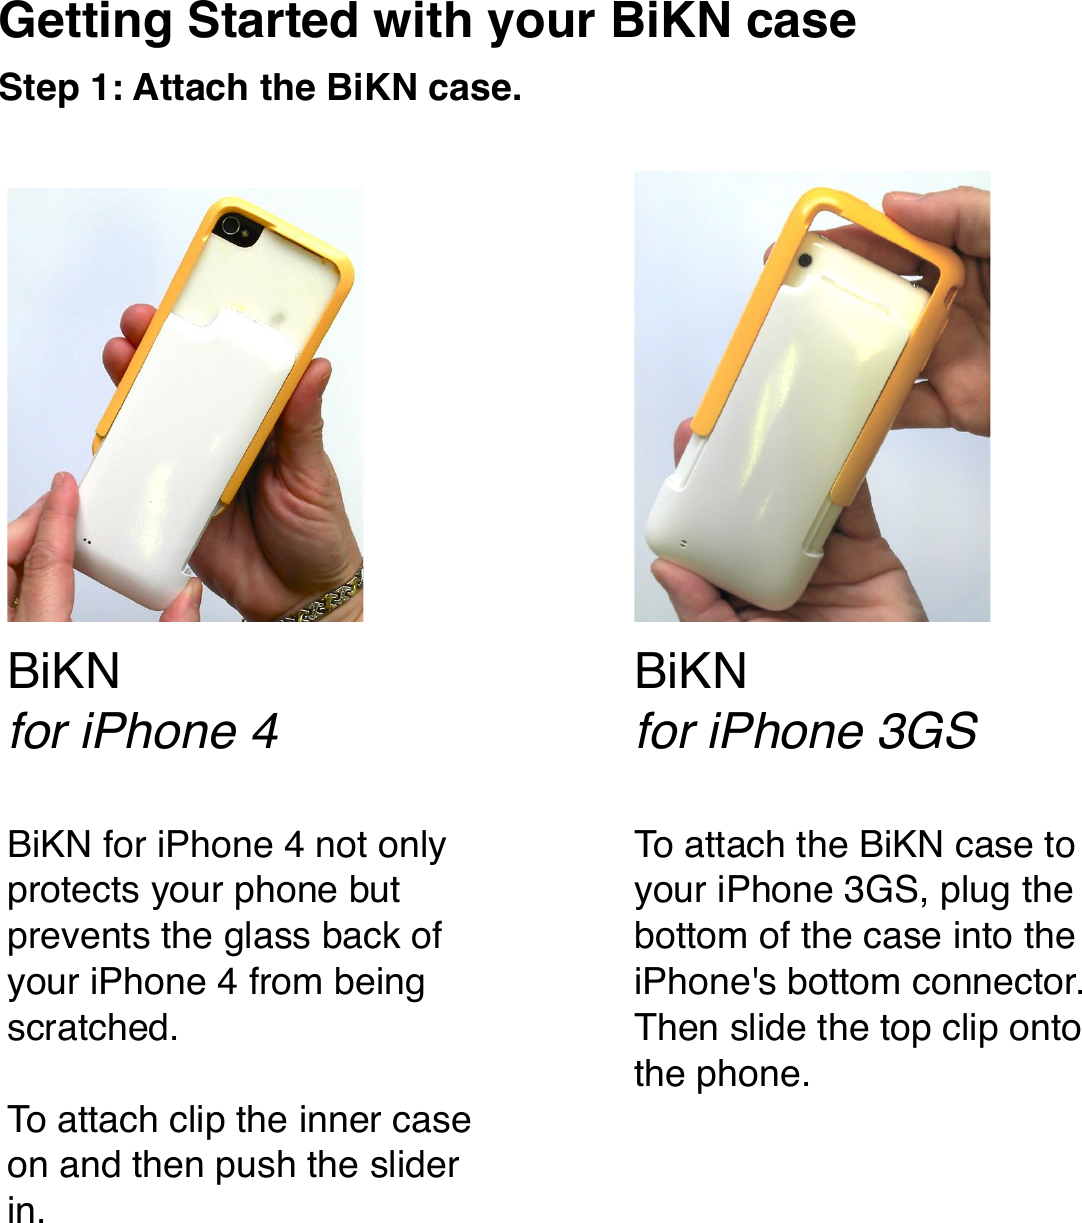 Getting Started with your BiKN caseStep 1: Attach the BiKN case.To attach the BiKN case to your iPhone 3GS, plug the bottom of the case into the iPhone&apos;s bottom connector. Then slide the top clip onto the phone.BiKN for iPhone 4 not only protects your phone but prevents the glass back of your iPhone 4 from being scratched.To attach clip the inner case on and then push the slider in.BiKNfor iPhone 4BiKNfor iPhone 3GS